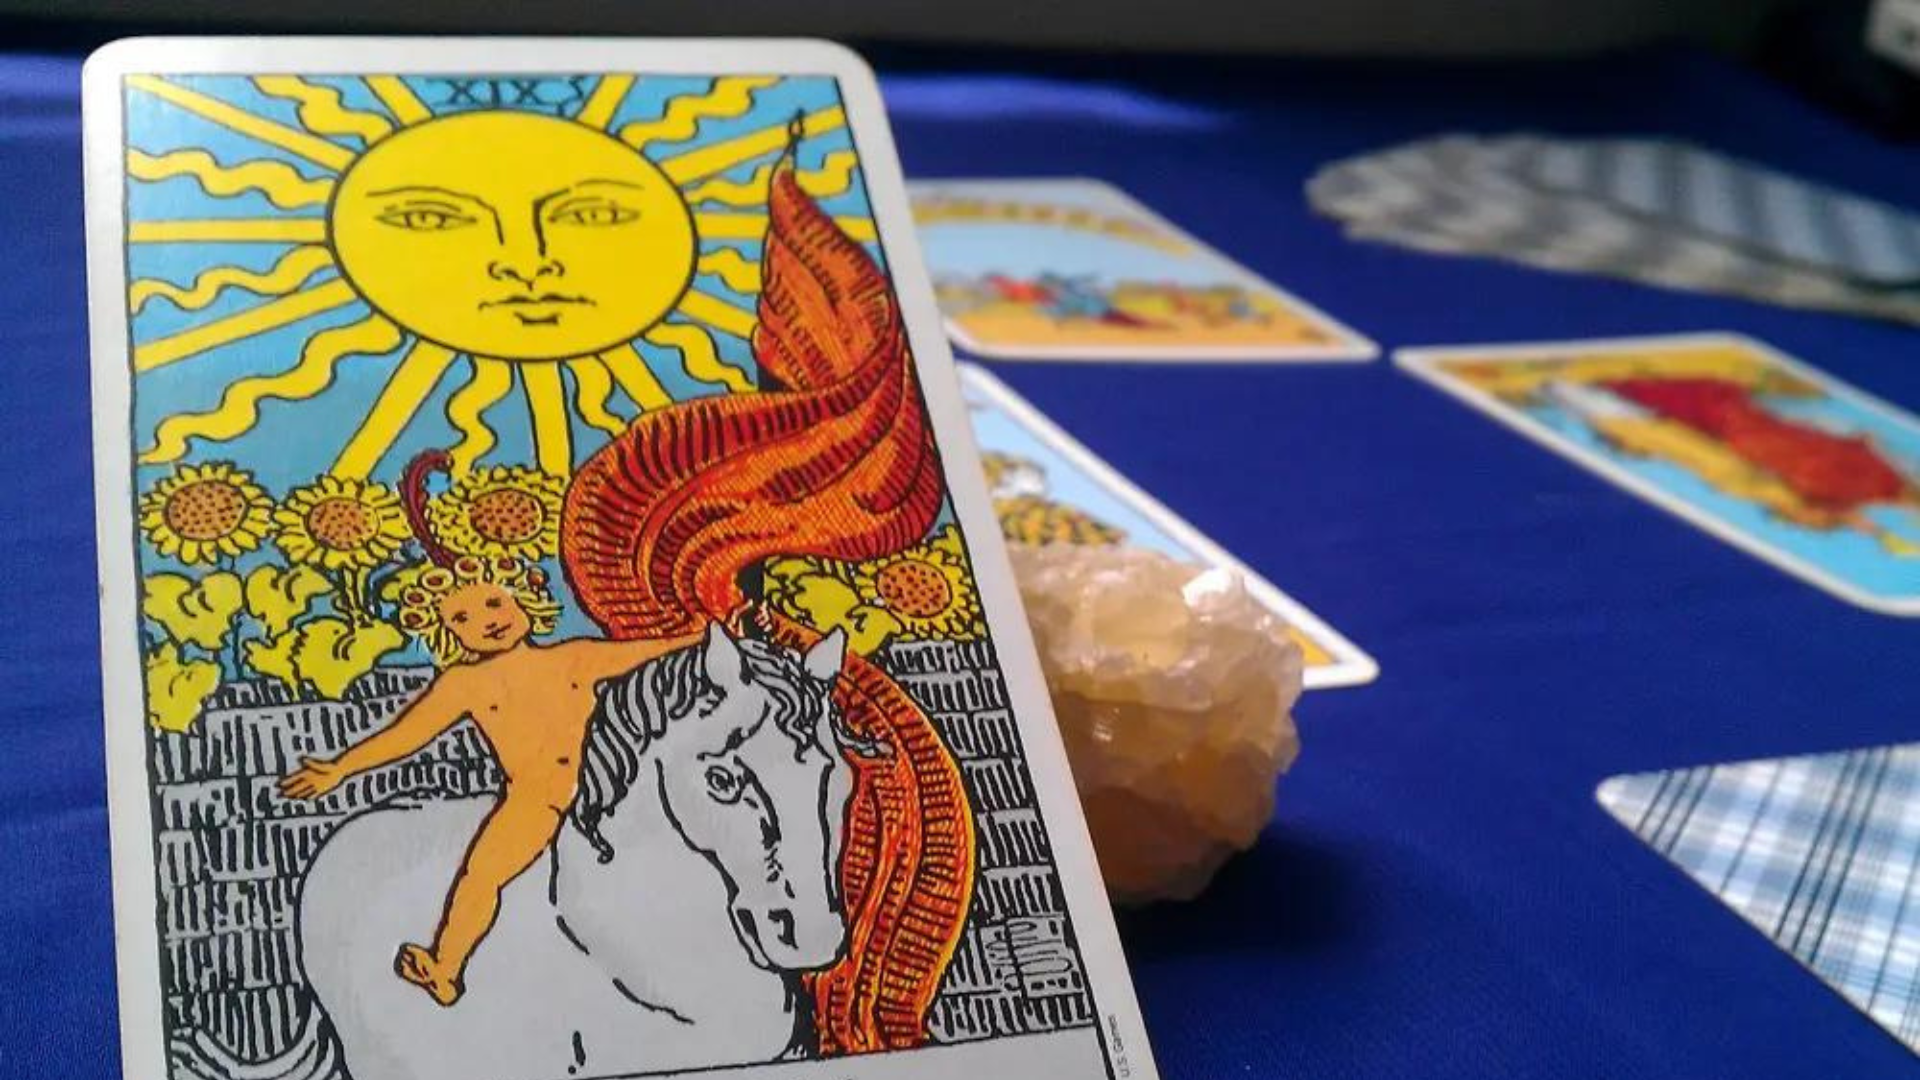 The Sun tarot card leaning on a crystal stone on top of a blue table